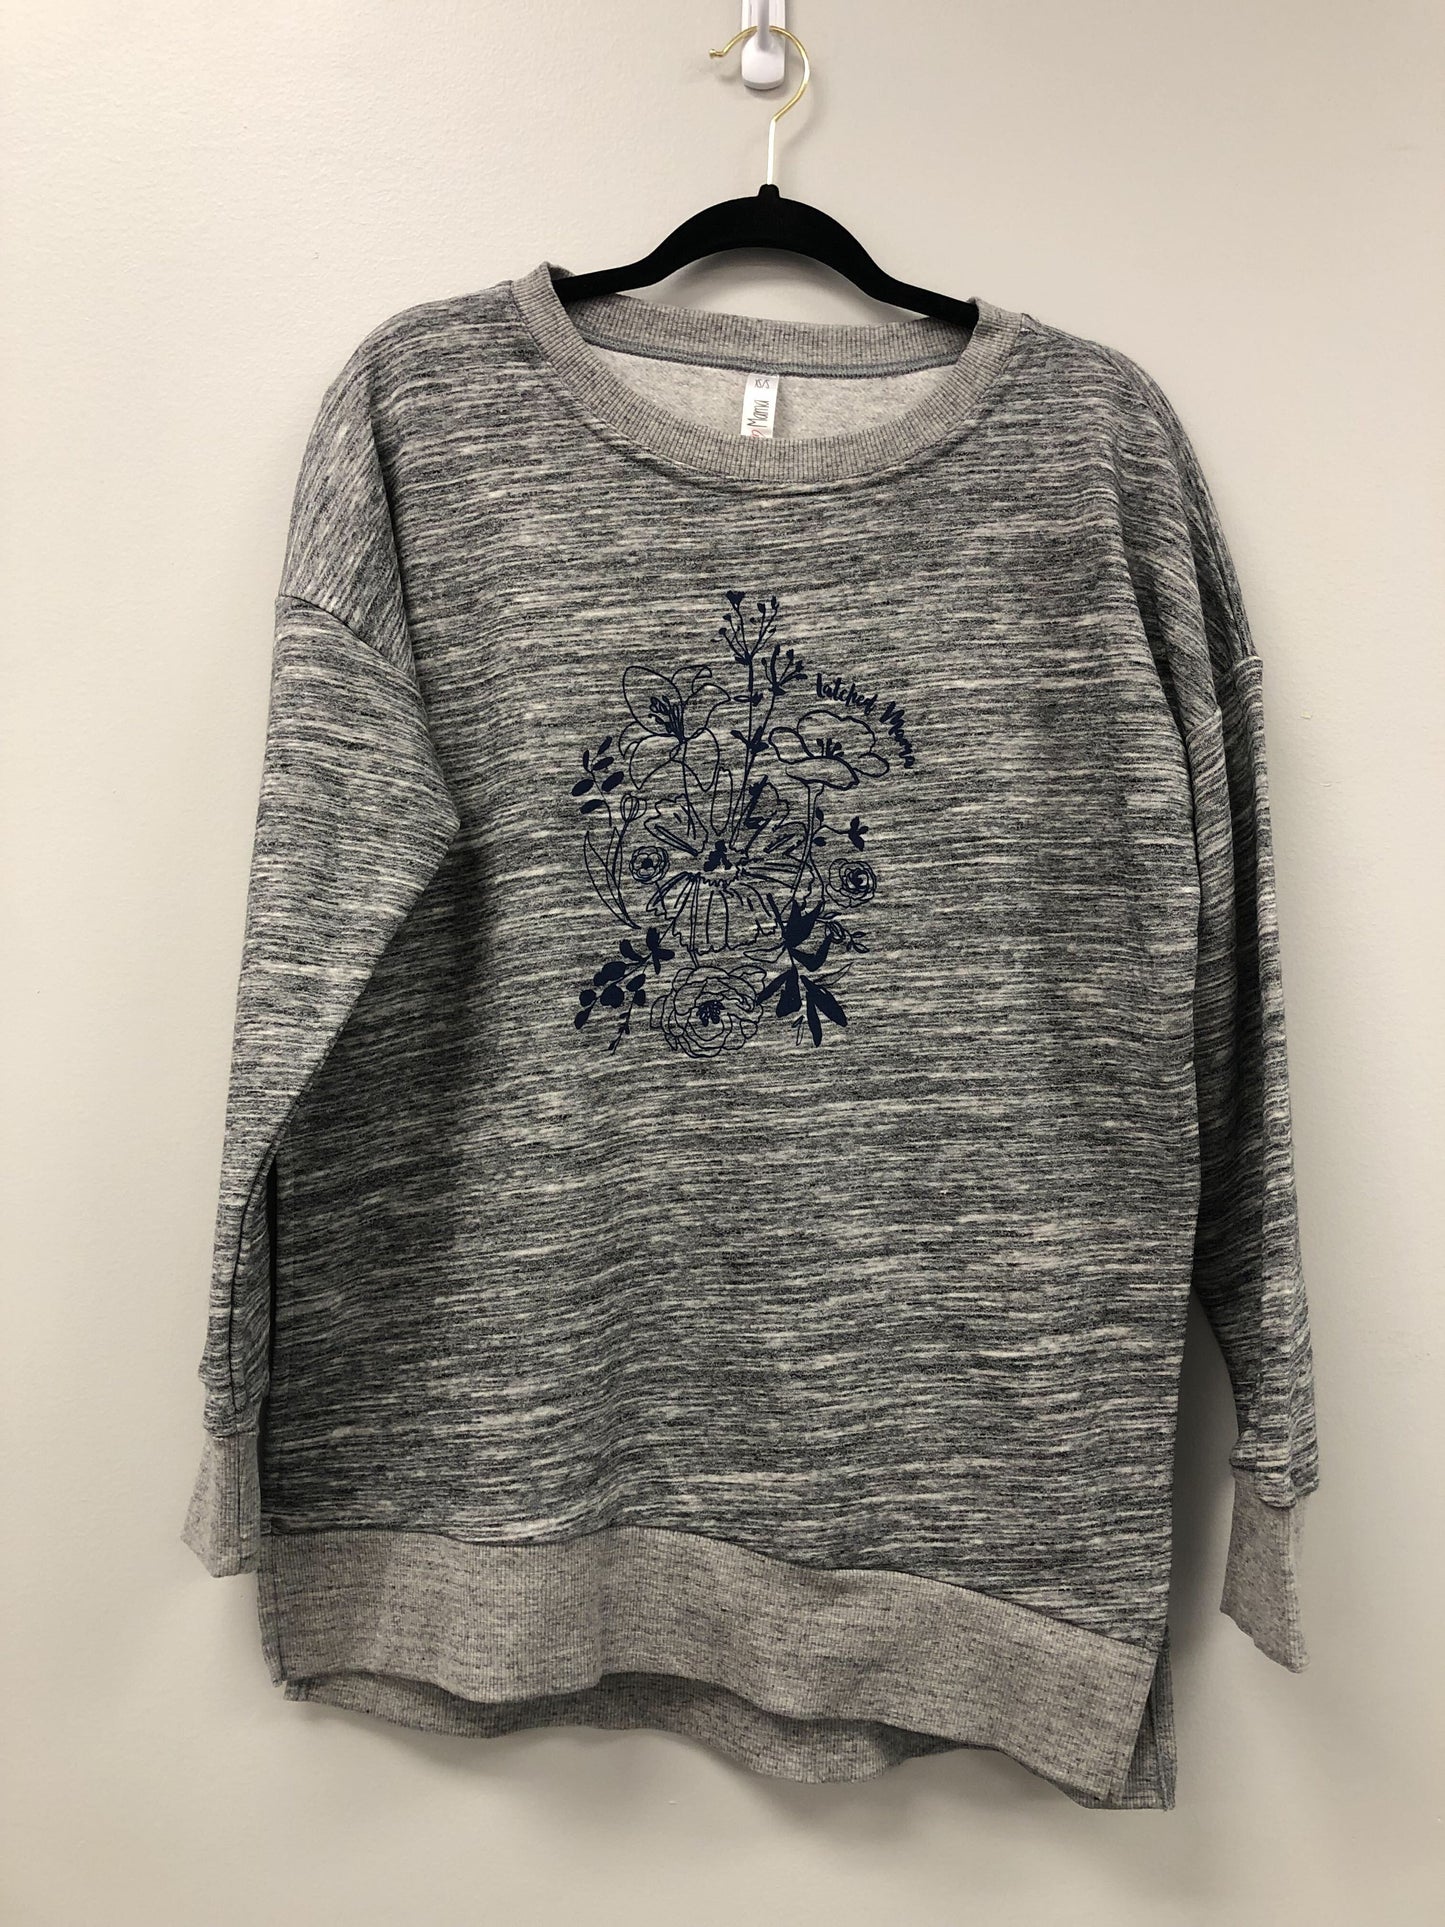 Outlet 5784 - Latched Mama Deluxe Crewneck Nursing Pullover - heathered grey/ wildflowers - XS/S